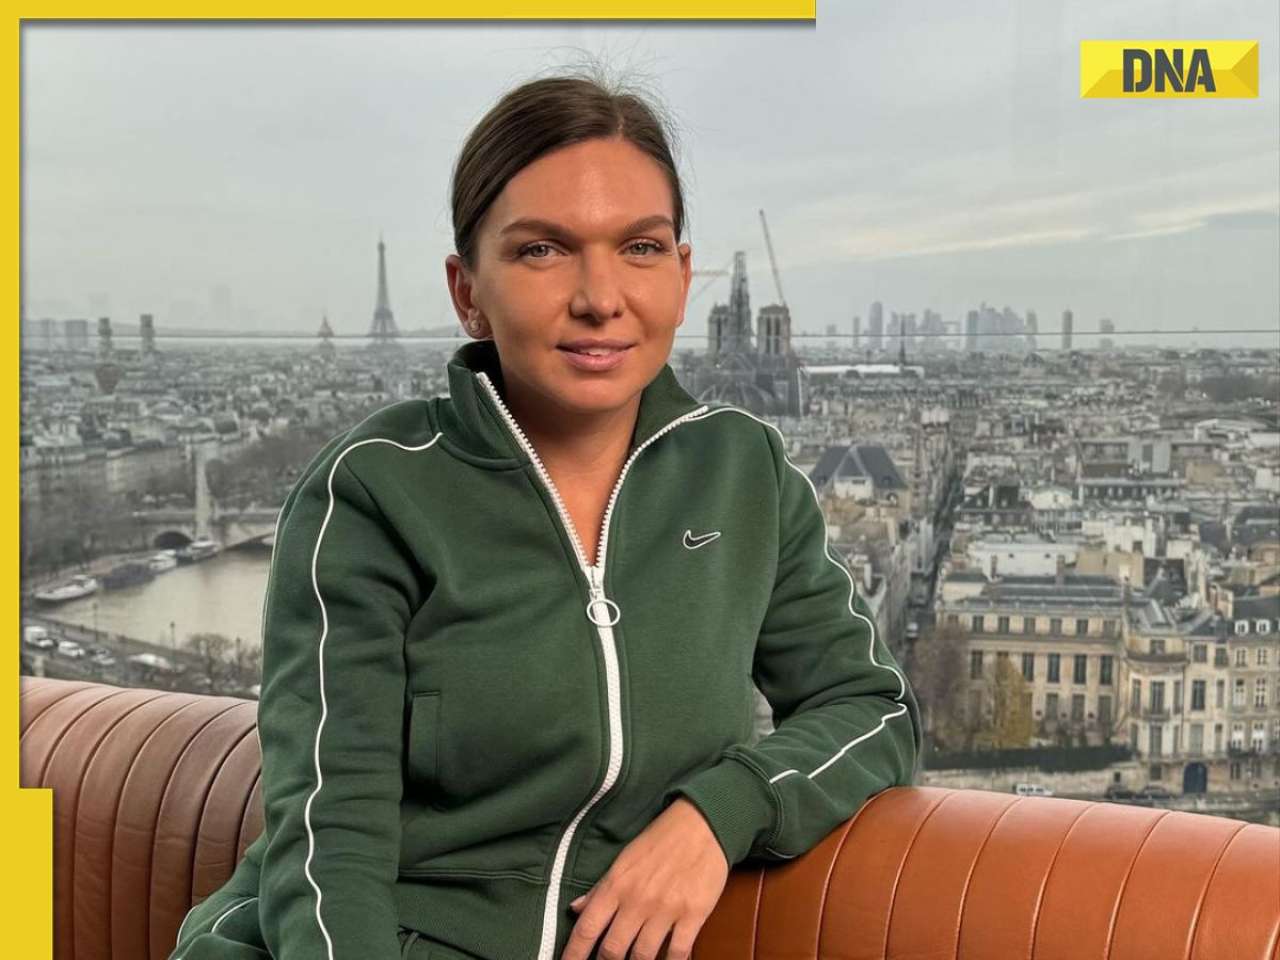 Two-time Grand Slam champion, Simona Halep free to return after doping ban reduced by CAS